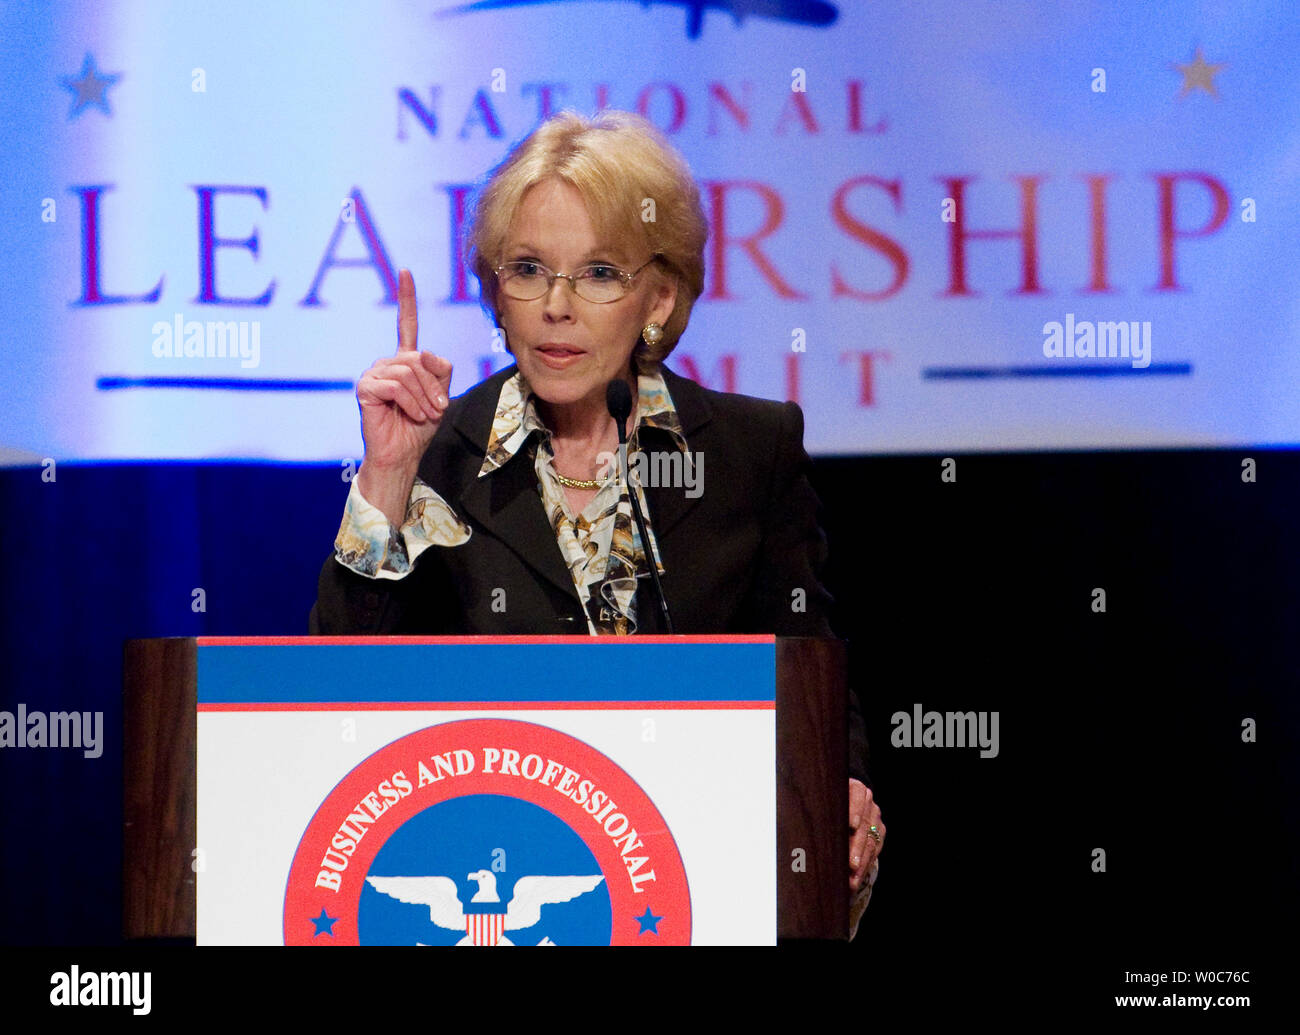 Bernadine P. Healy, M.D., Health Editor, U.S. News & World Report, speaks during the 2008 Business and Professional Women's Leadership Summit in Washington on April 30, 2008. Dr. Hearly was the first woman to head the National Institutes of Health (NIH) from 1991 to 1993. This summit co-hosted by Sen. Kay Bailey Hutchison, R-TX, and Sen. Lisa Murkowski, R-AK, brings together professional women from across the United States to discuss solutions to secure America's future in a global economy. (UPI Photo/Patrick D. McDermott) Stock Photo